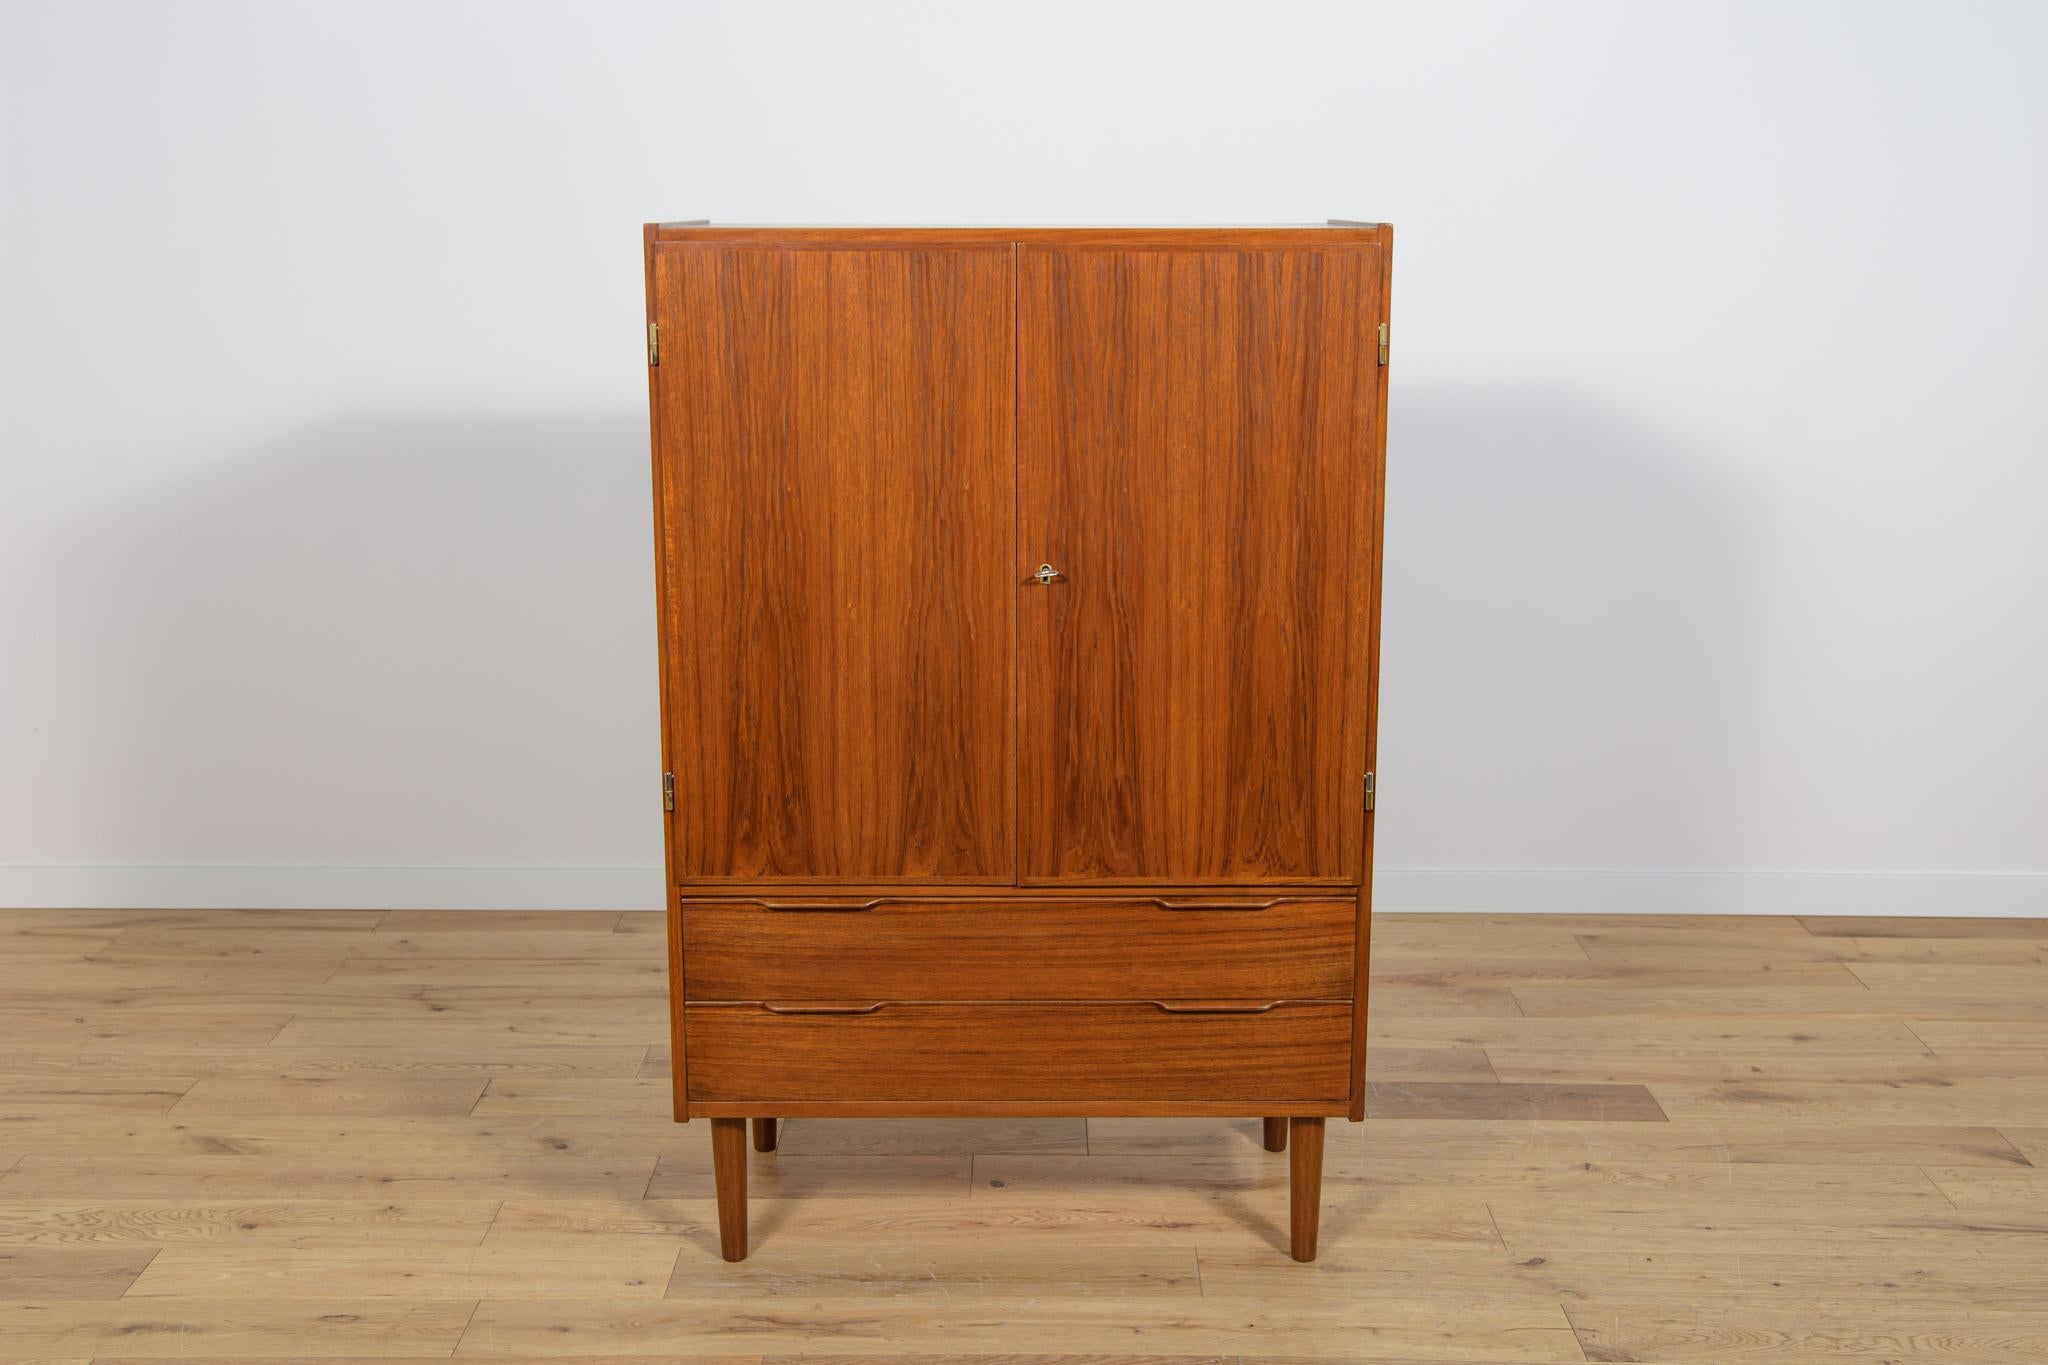 This mid century chest of drawers in teak was manufactured in the denmark the 1960s. The chest of drawers has 2 drawers and a cabinet with 3 shelves. Completely restored, teak elements have been cleaned from the old surface and finished with Danish